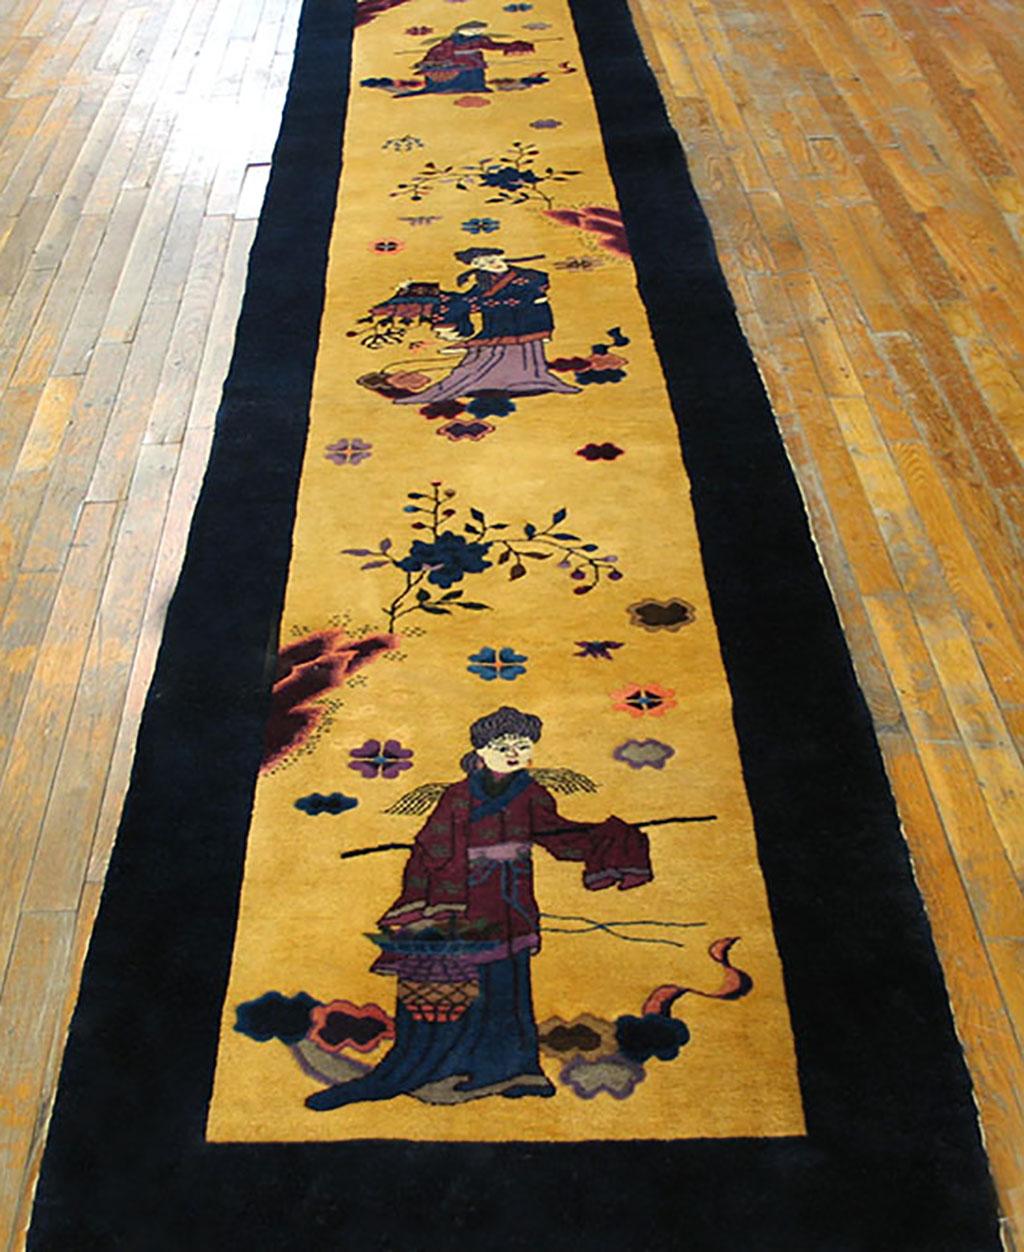 This yellow ground long runner features figures in traditional Chinese dress among rocky outcrops, clouds and airborne rosettes. Pictorial runners are rare and this northeast Chinese rug must have been a special order. The figures were probably